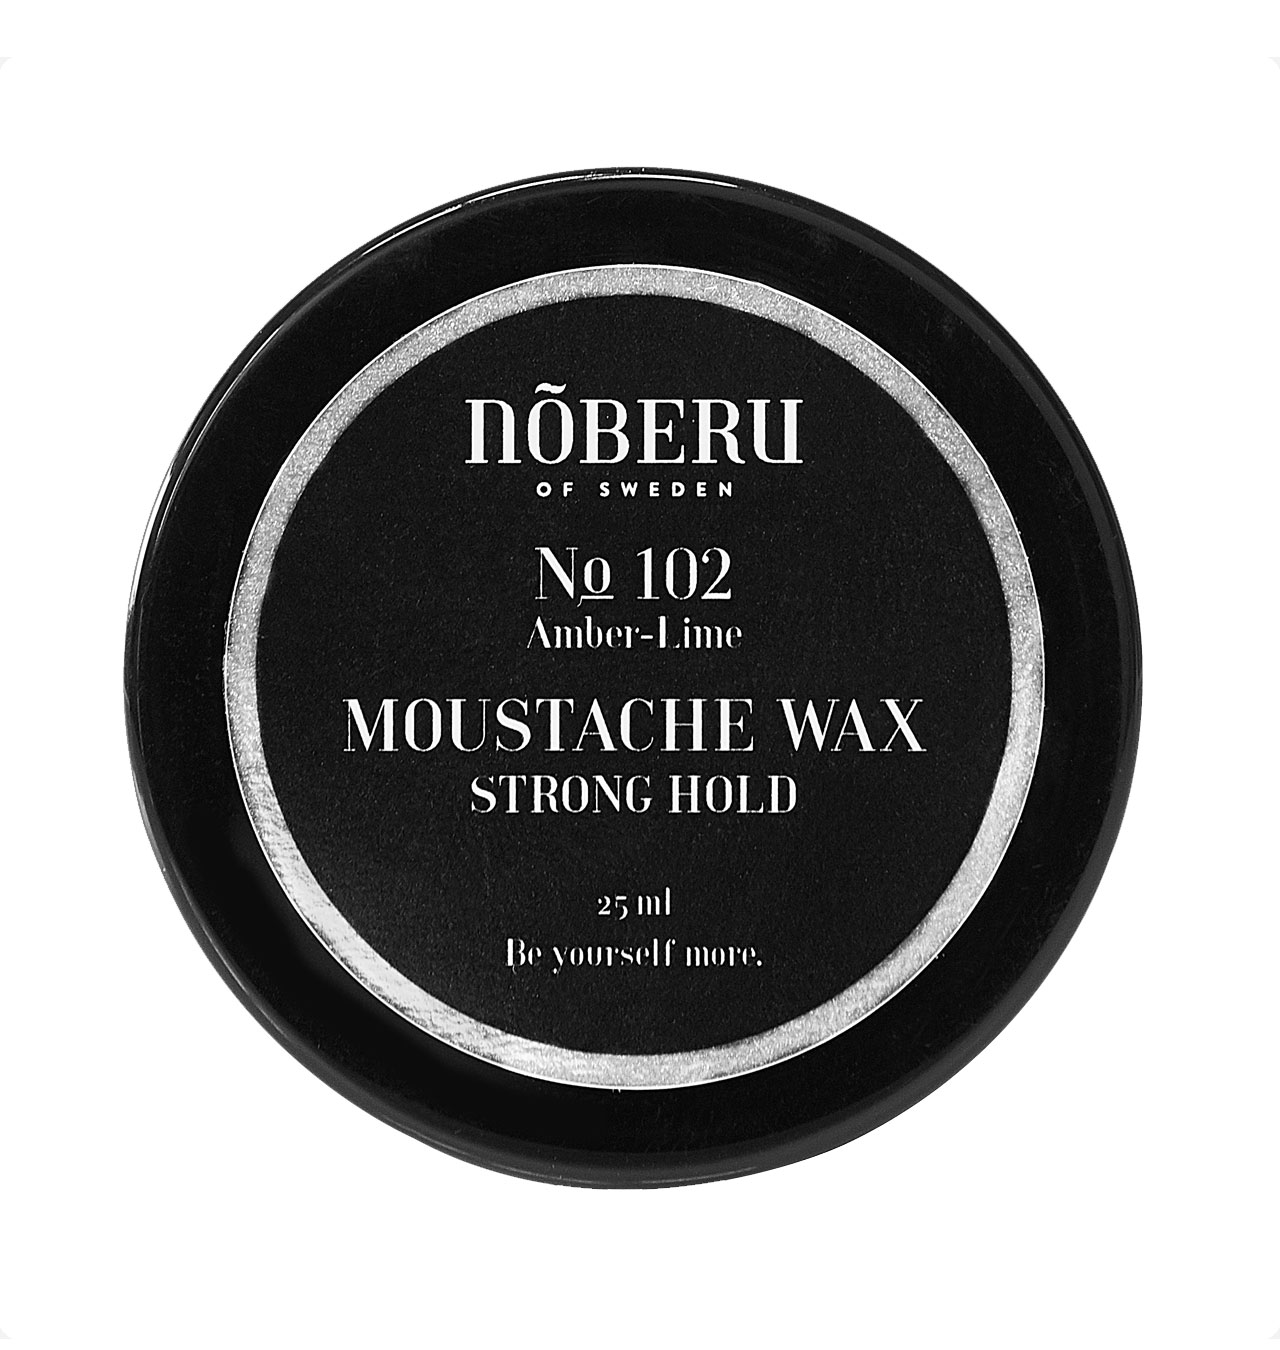 Nõberu - Moustache Wax Strong Hold Amber-Lime